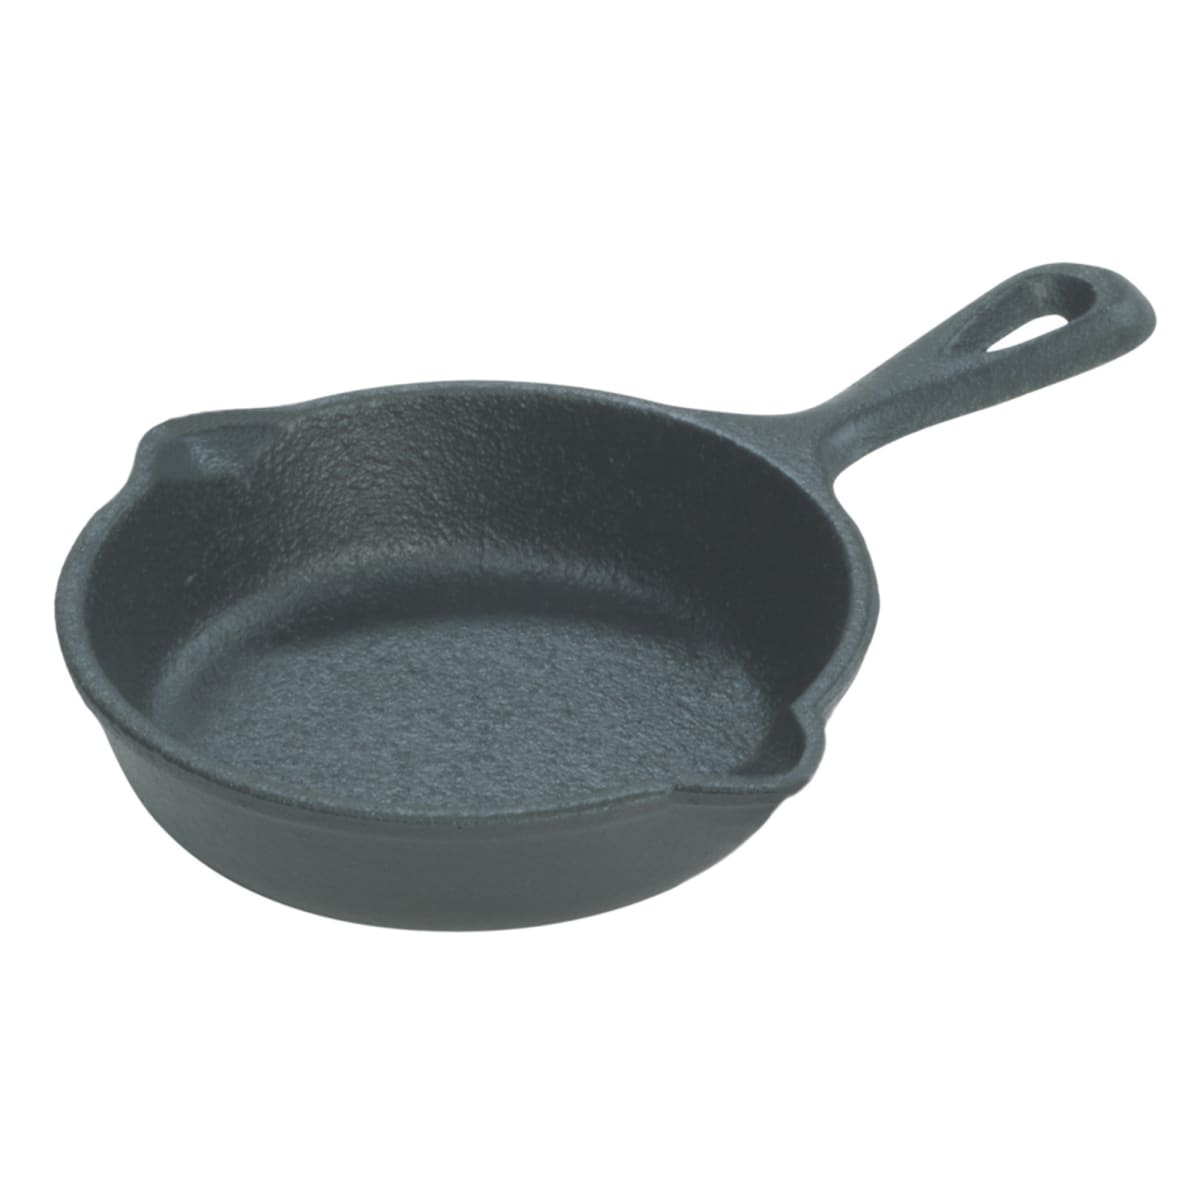  Commercial CHEF Cast Iron Skillet, 10.5” Square Pre-seasoned Cast  Iron Pan: Home & Kitchen